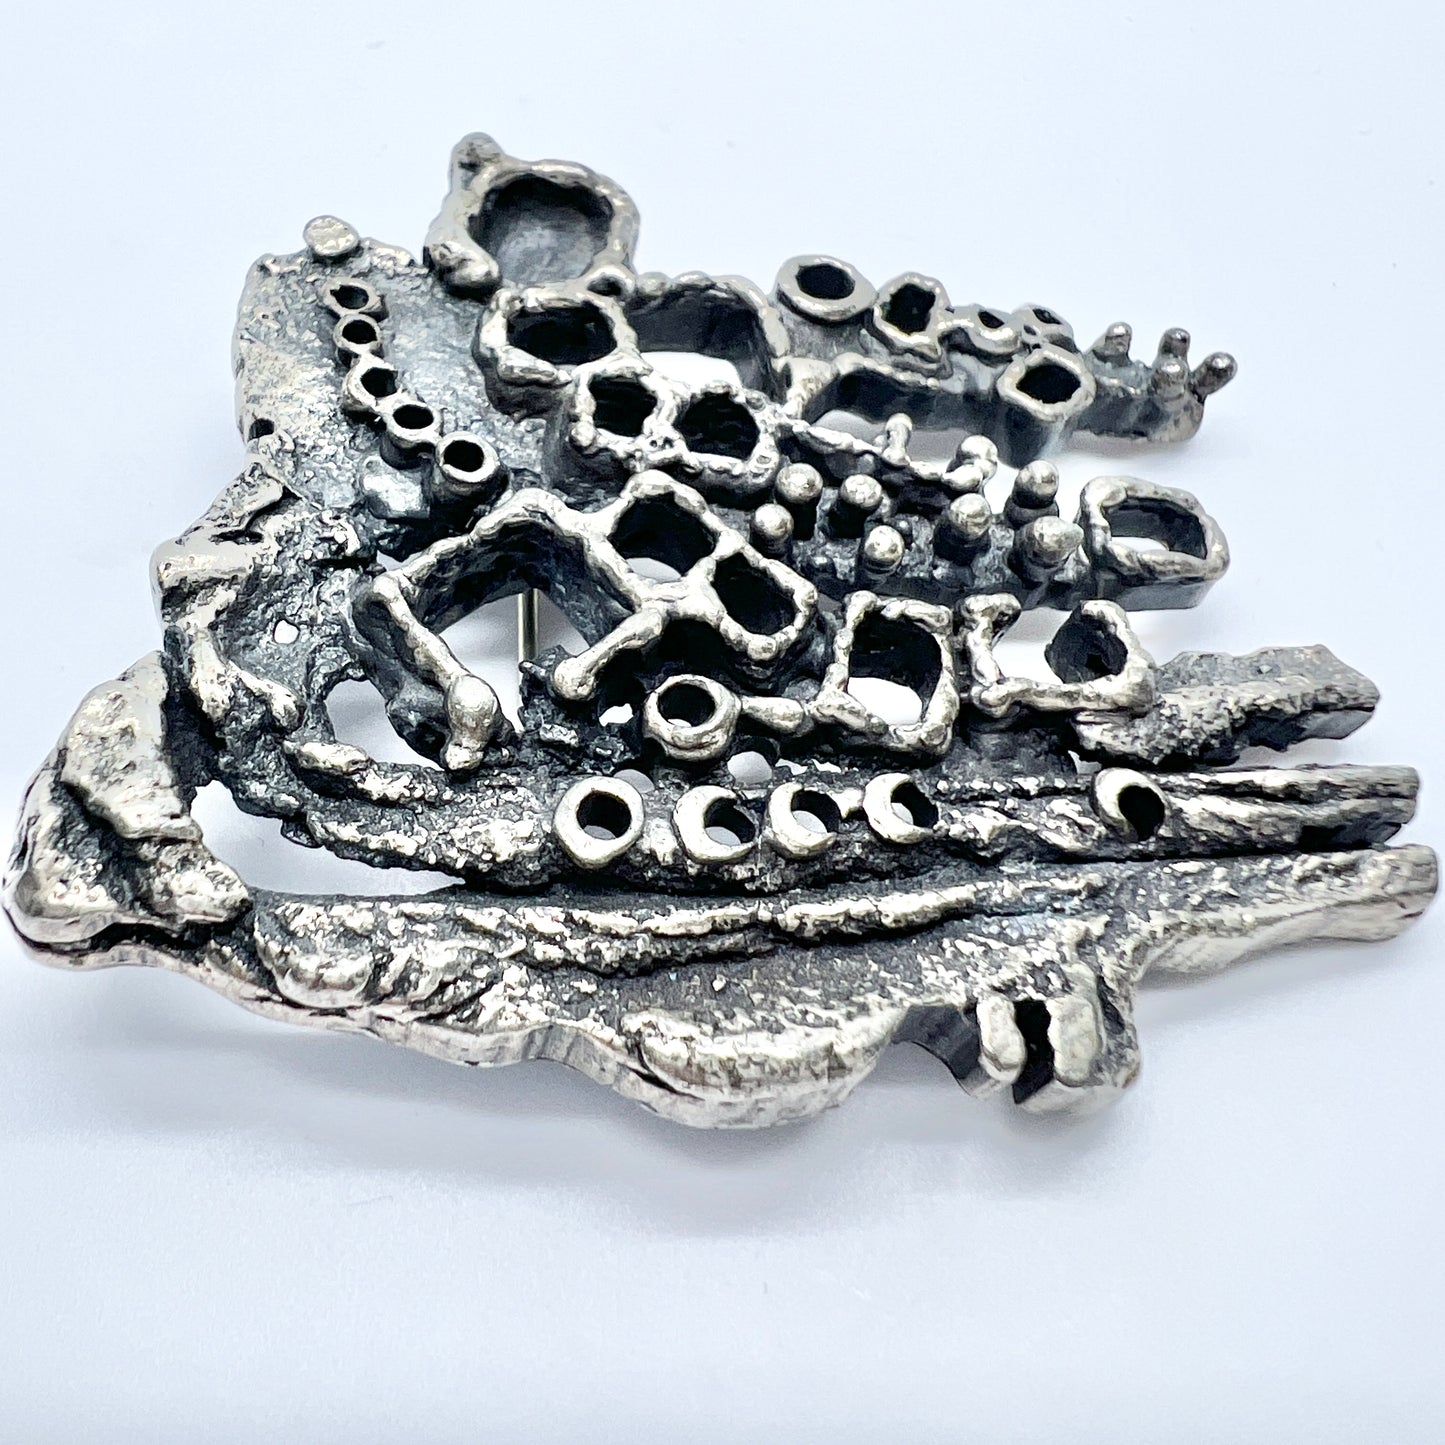 Guy Vidal, Canada early 1970s. Vintage Modernist Plated Pewter Brooch.